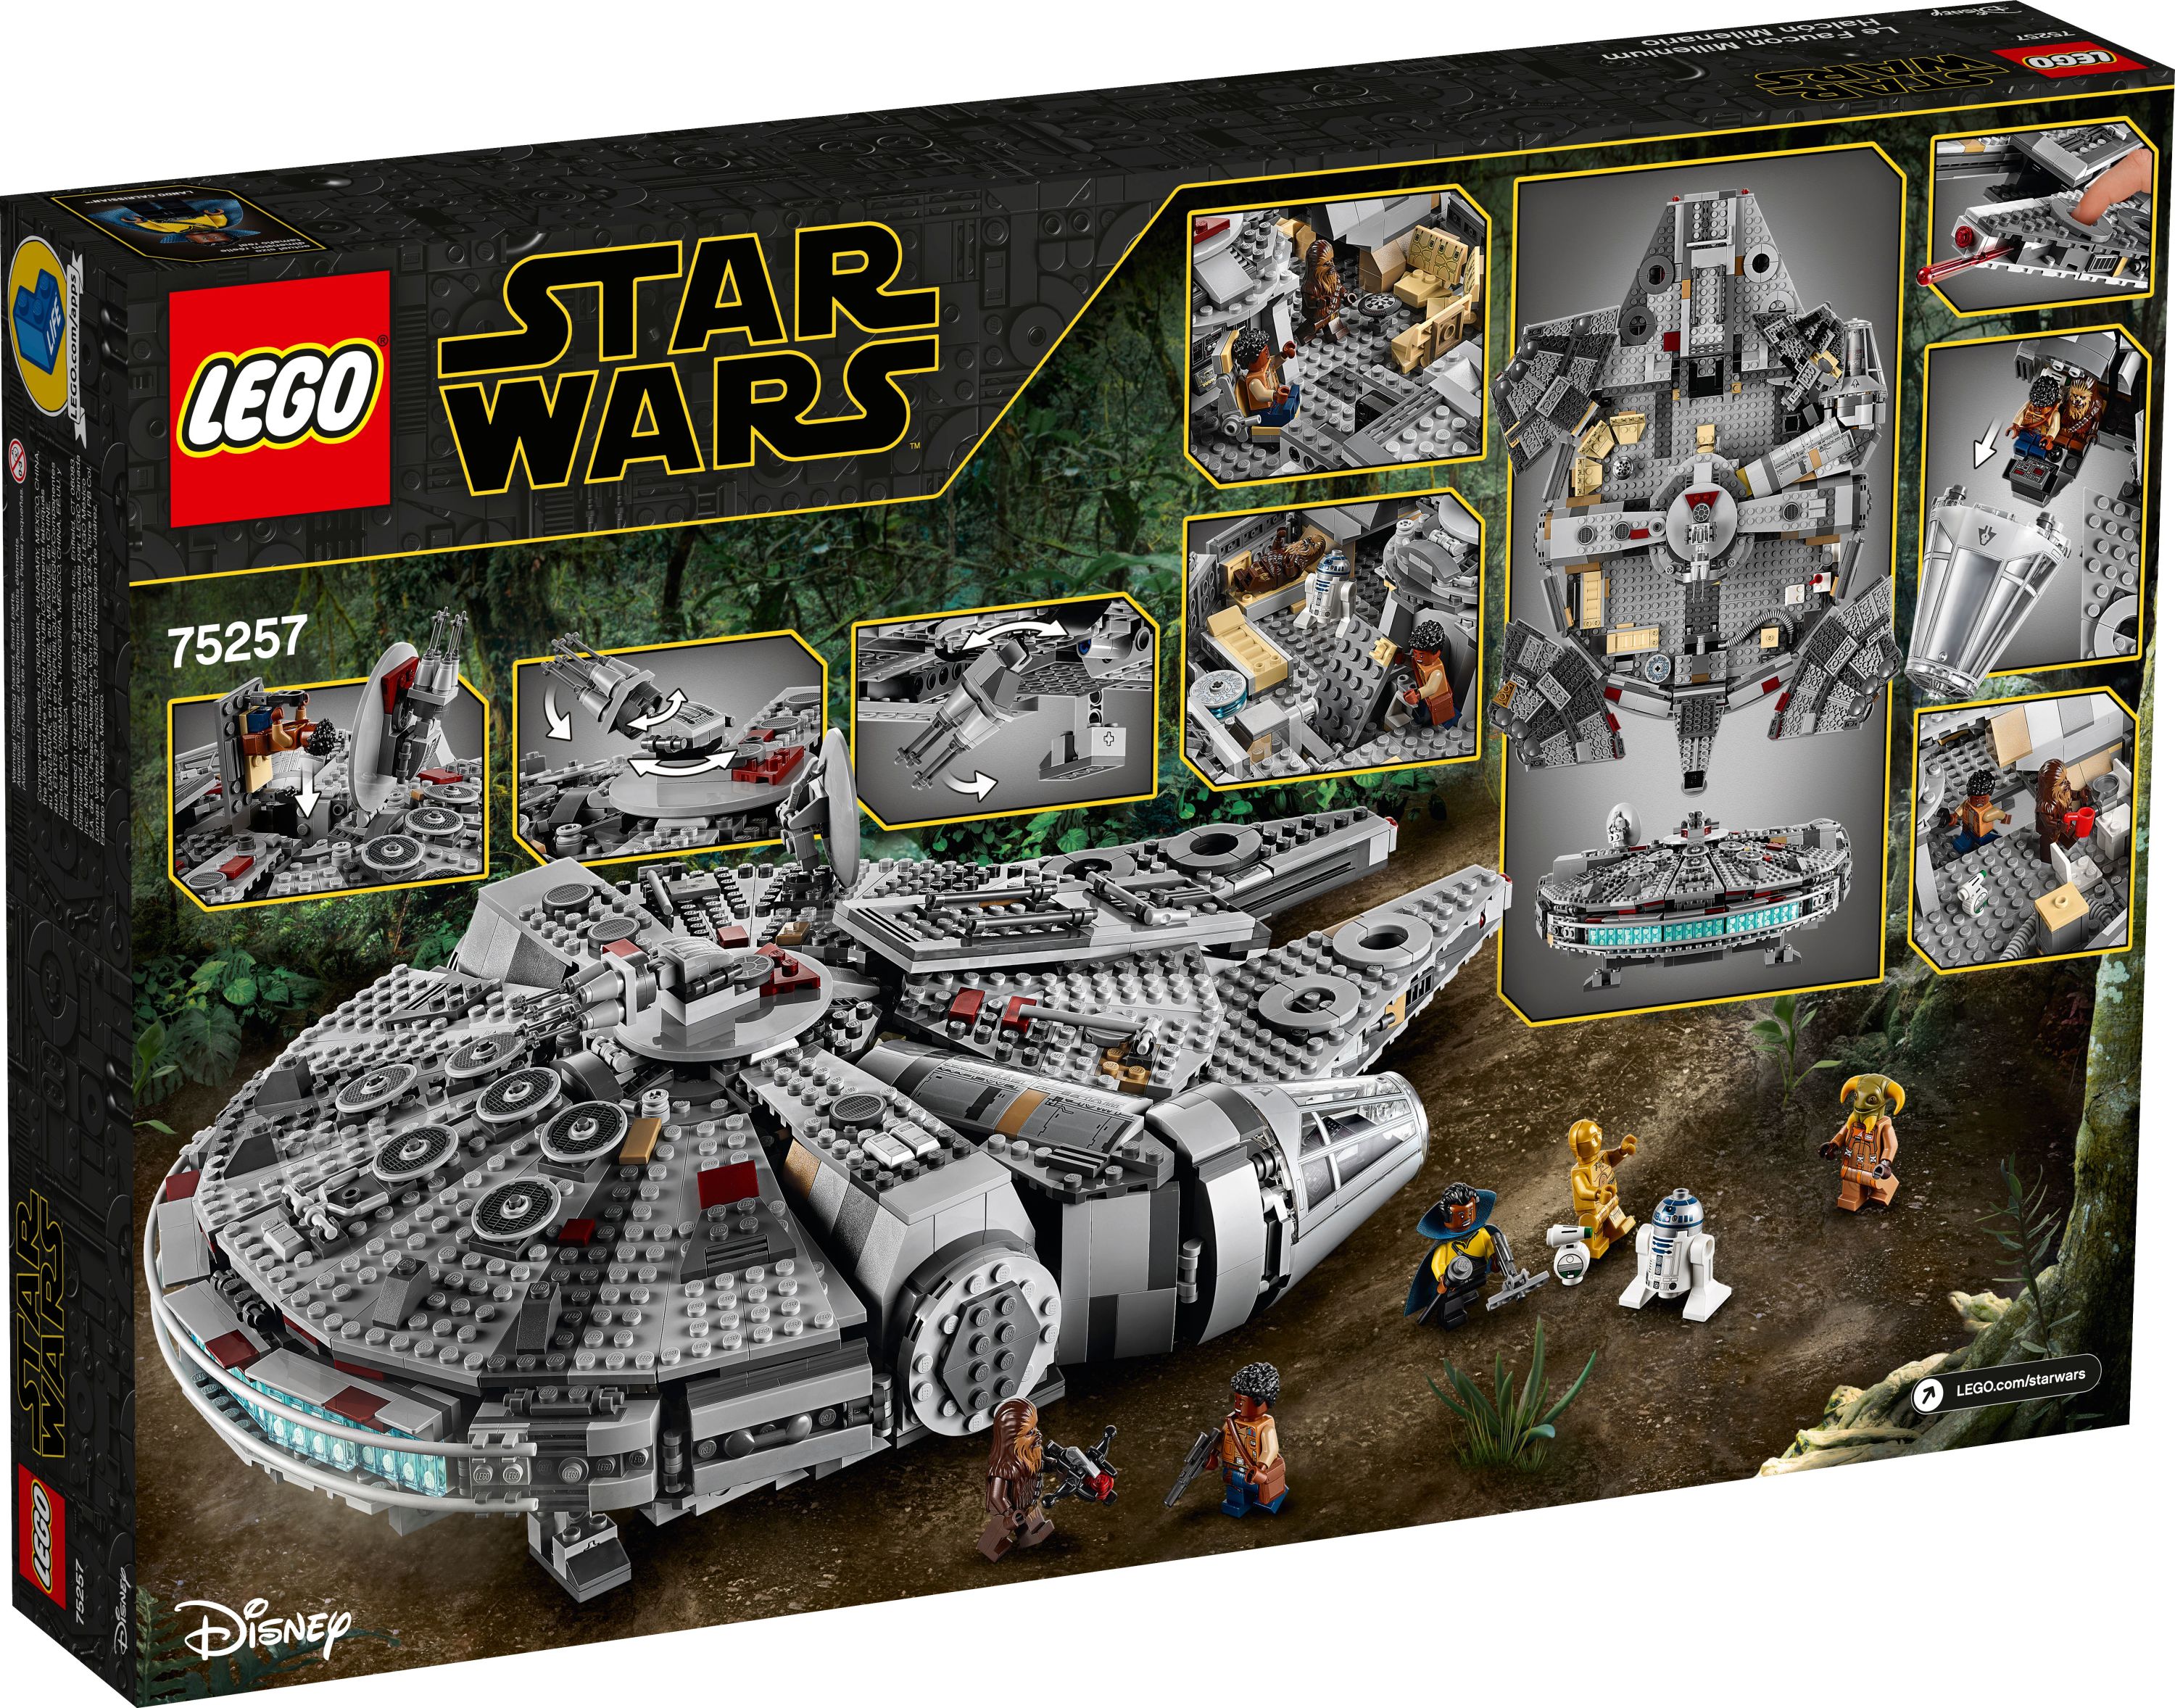 LEGO Star Wars Millennium Falcon 75257 Building Set - Starship Model with Finn, Chewbacca, Lando Calrissian, Boolio, C-3PO, R2-D2, and D-O Minifigures, The Rise of Skywalker Movie Collection - image 7 of 9